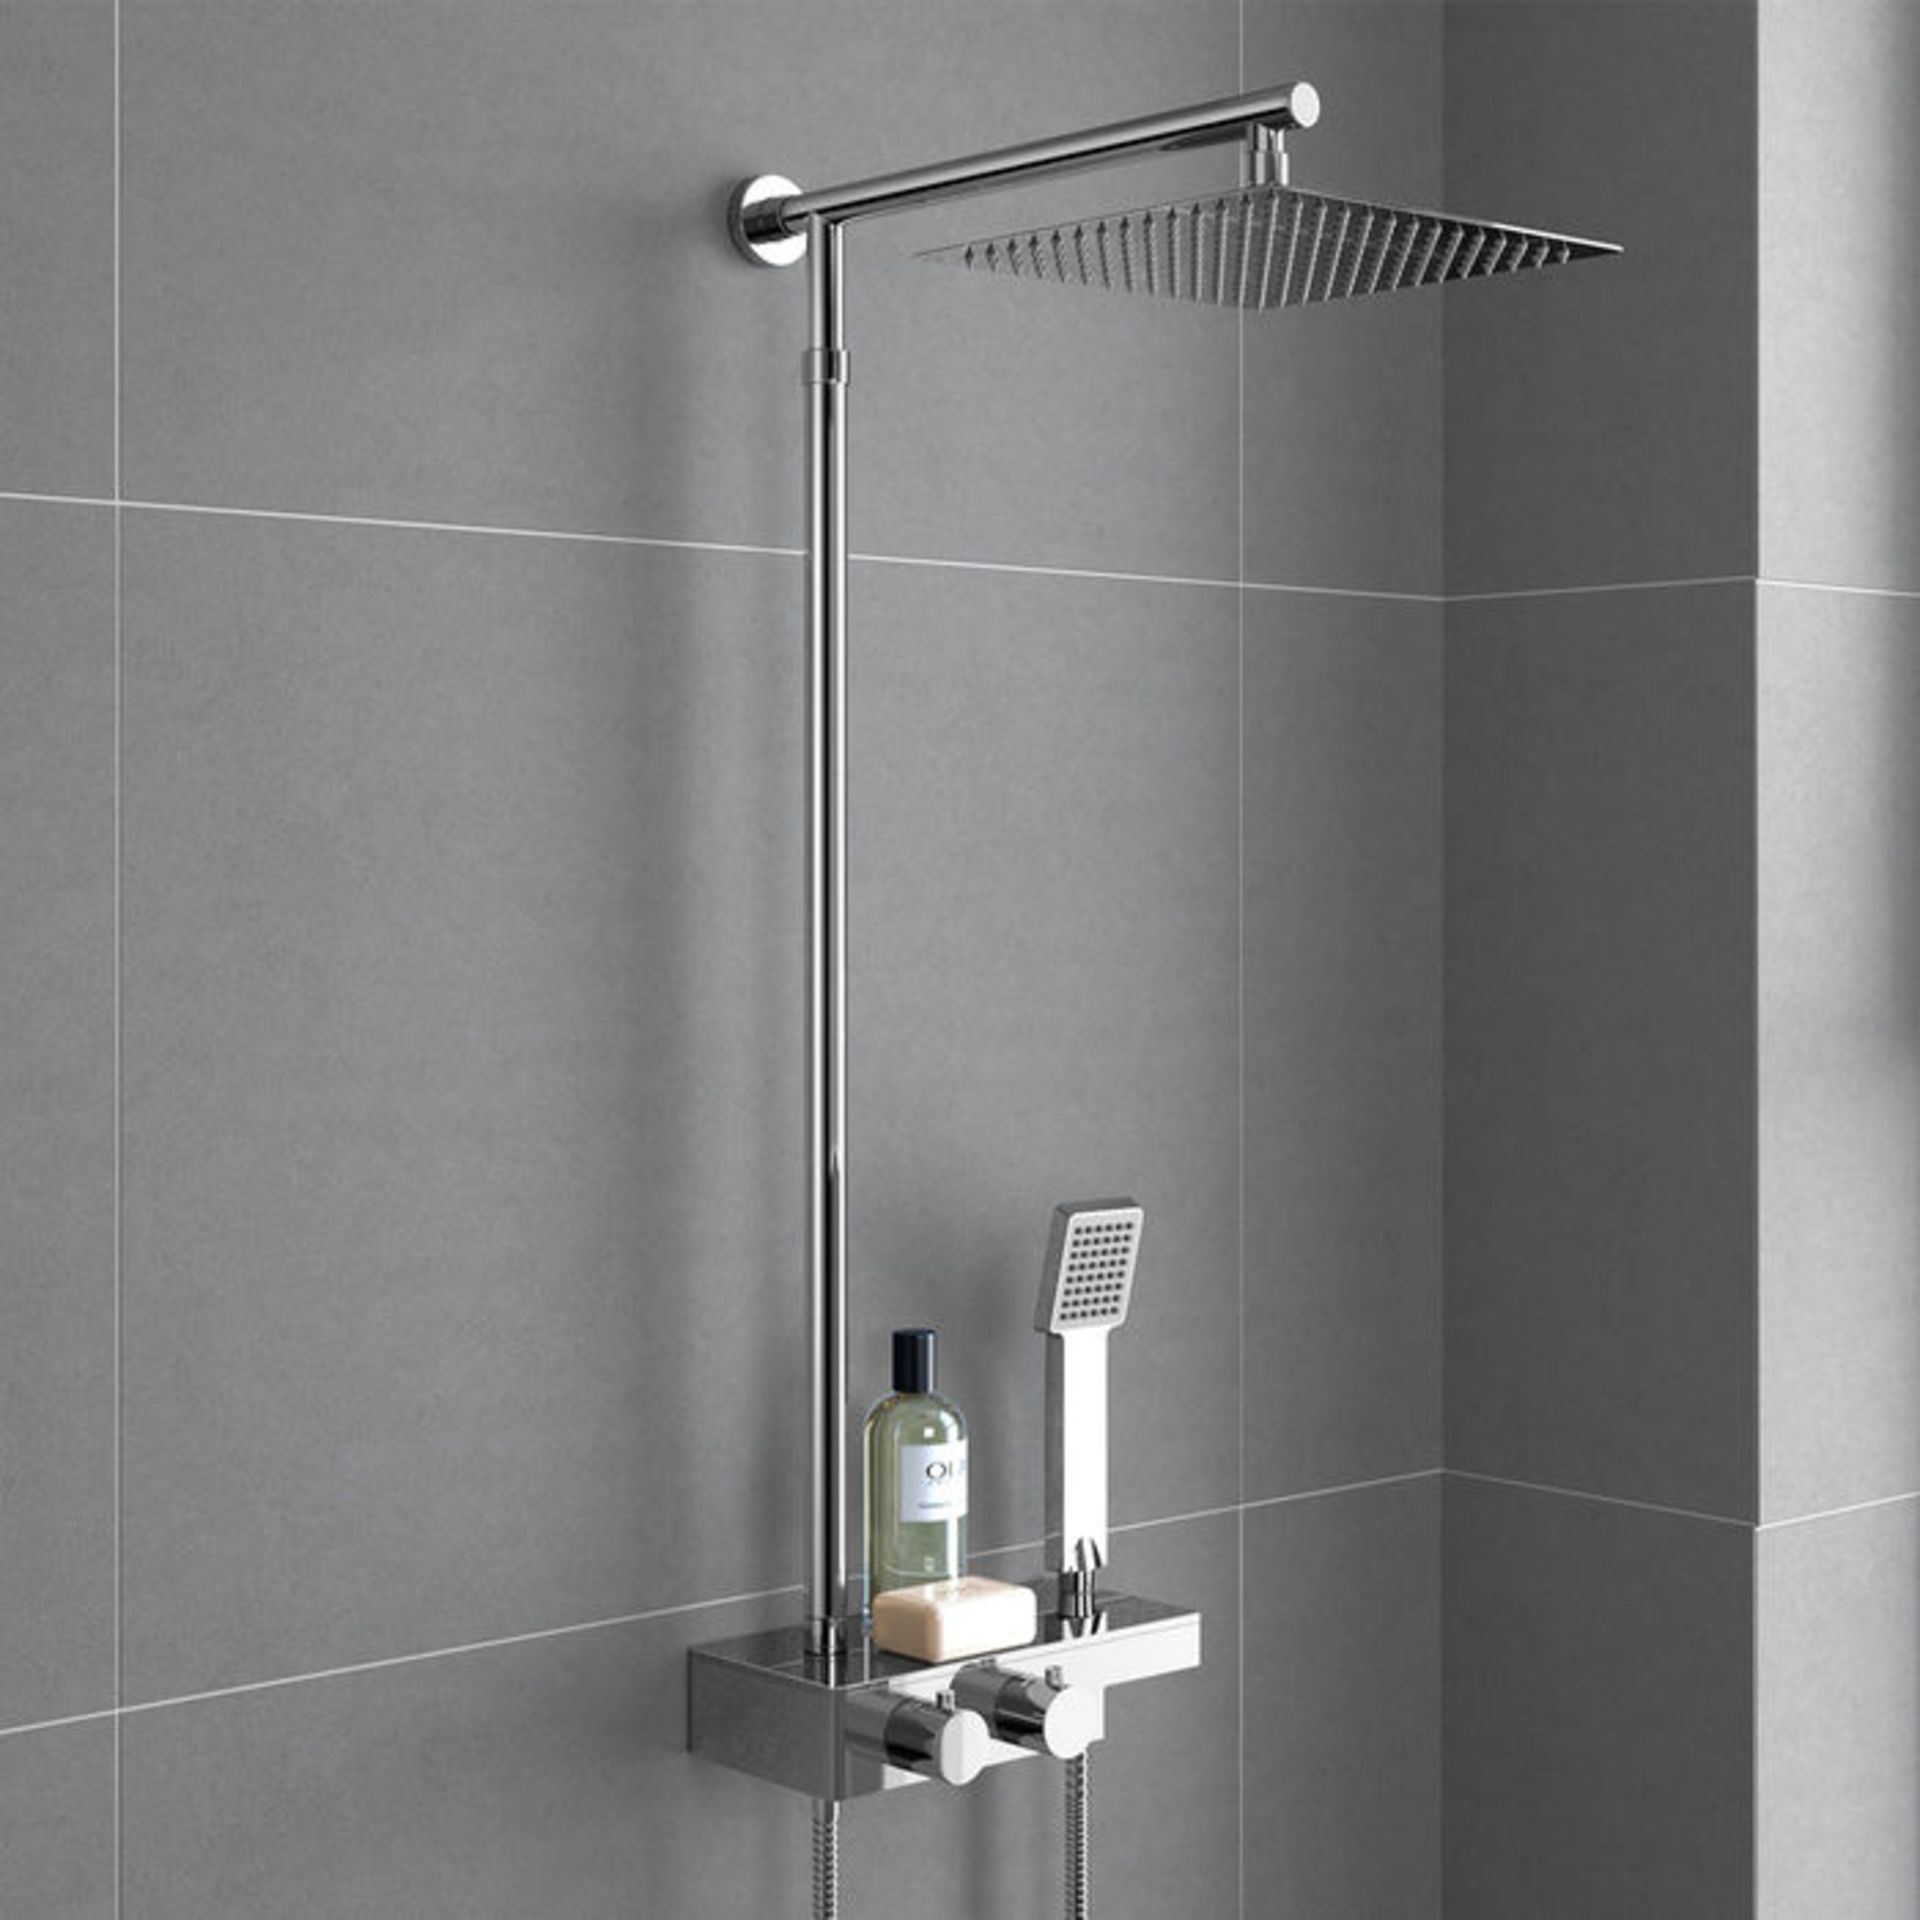 (ZL209) Square Exposed Thermostatic Shower Shelf, Kit & Large Head. RRP £349.99. Style meets - Image 3 of 4